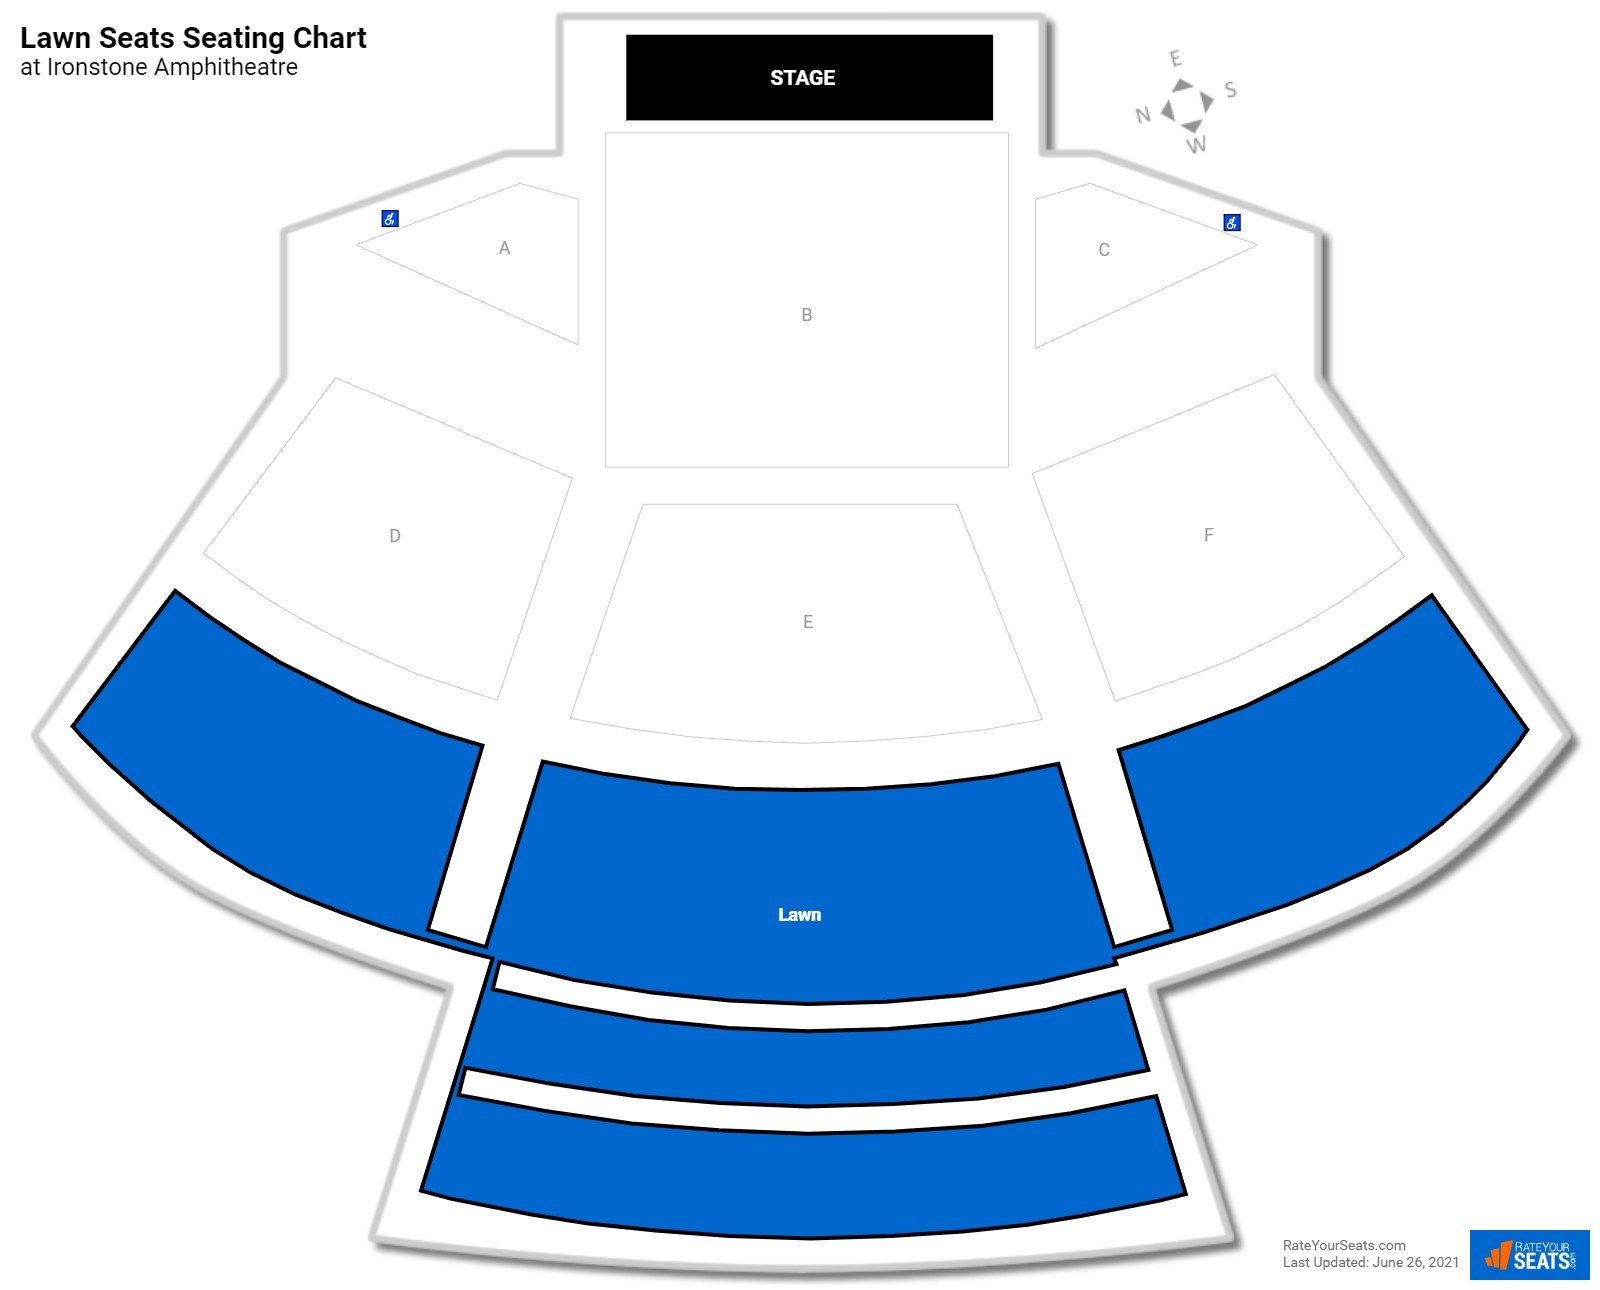 Concert Lawn Seats Seating Chart at Ironstone Amphitheatre